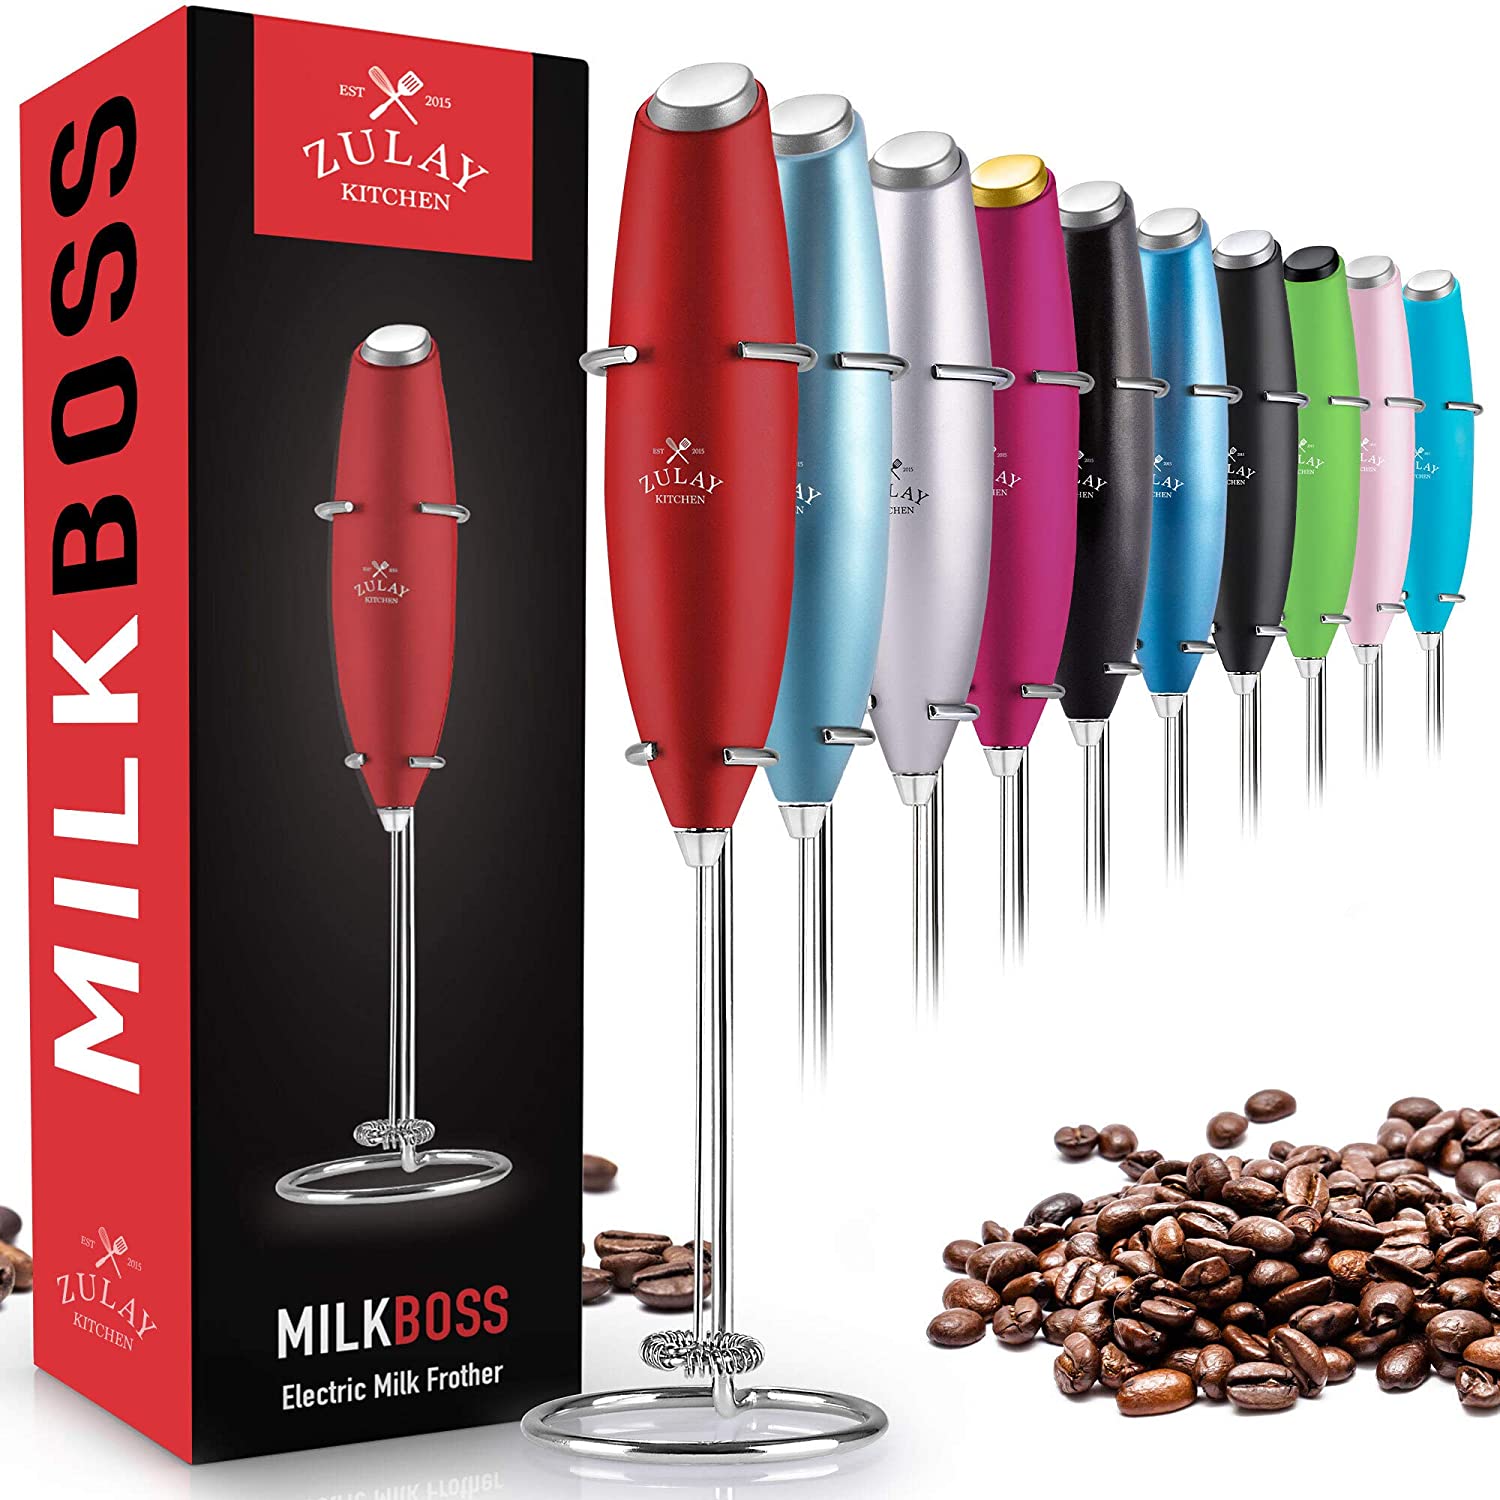 Zulay Kitchen MILK BOSS Milk Frother With Stand - Ruby Red, 1